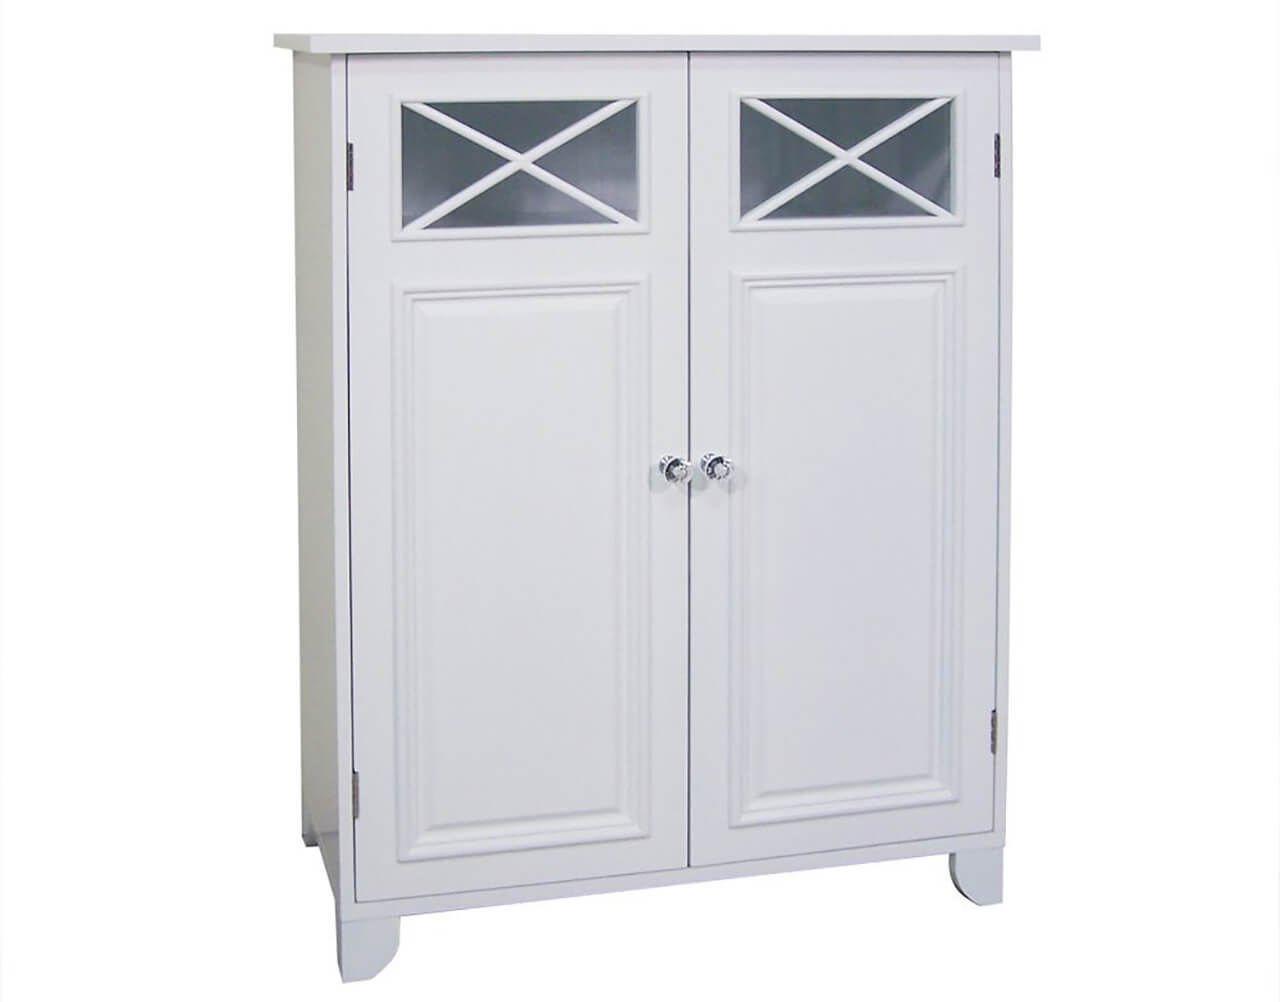 White Yaheetech Bathroom Wall Cabinets/Cupboard with Double Door and Adjustable Shelf Kitchen/Toilet Storage/Organiser Unit